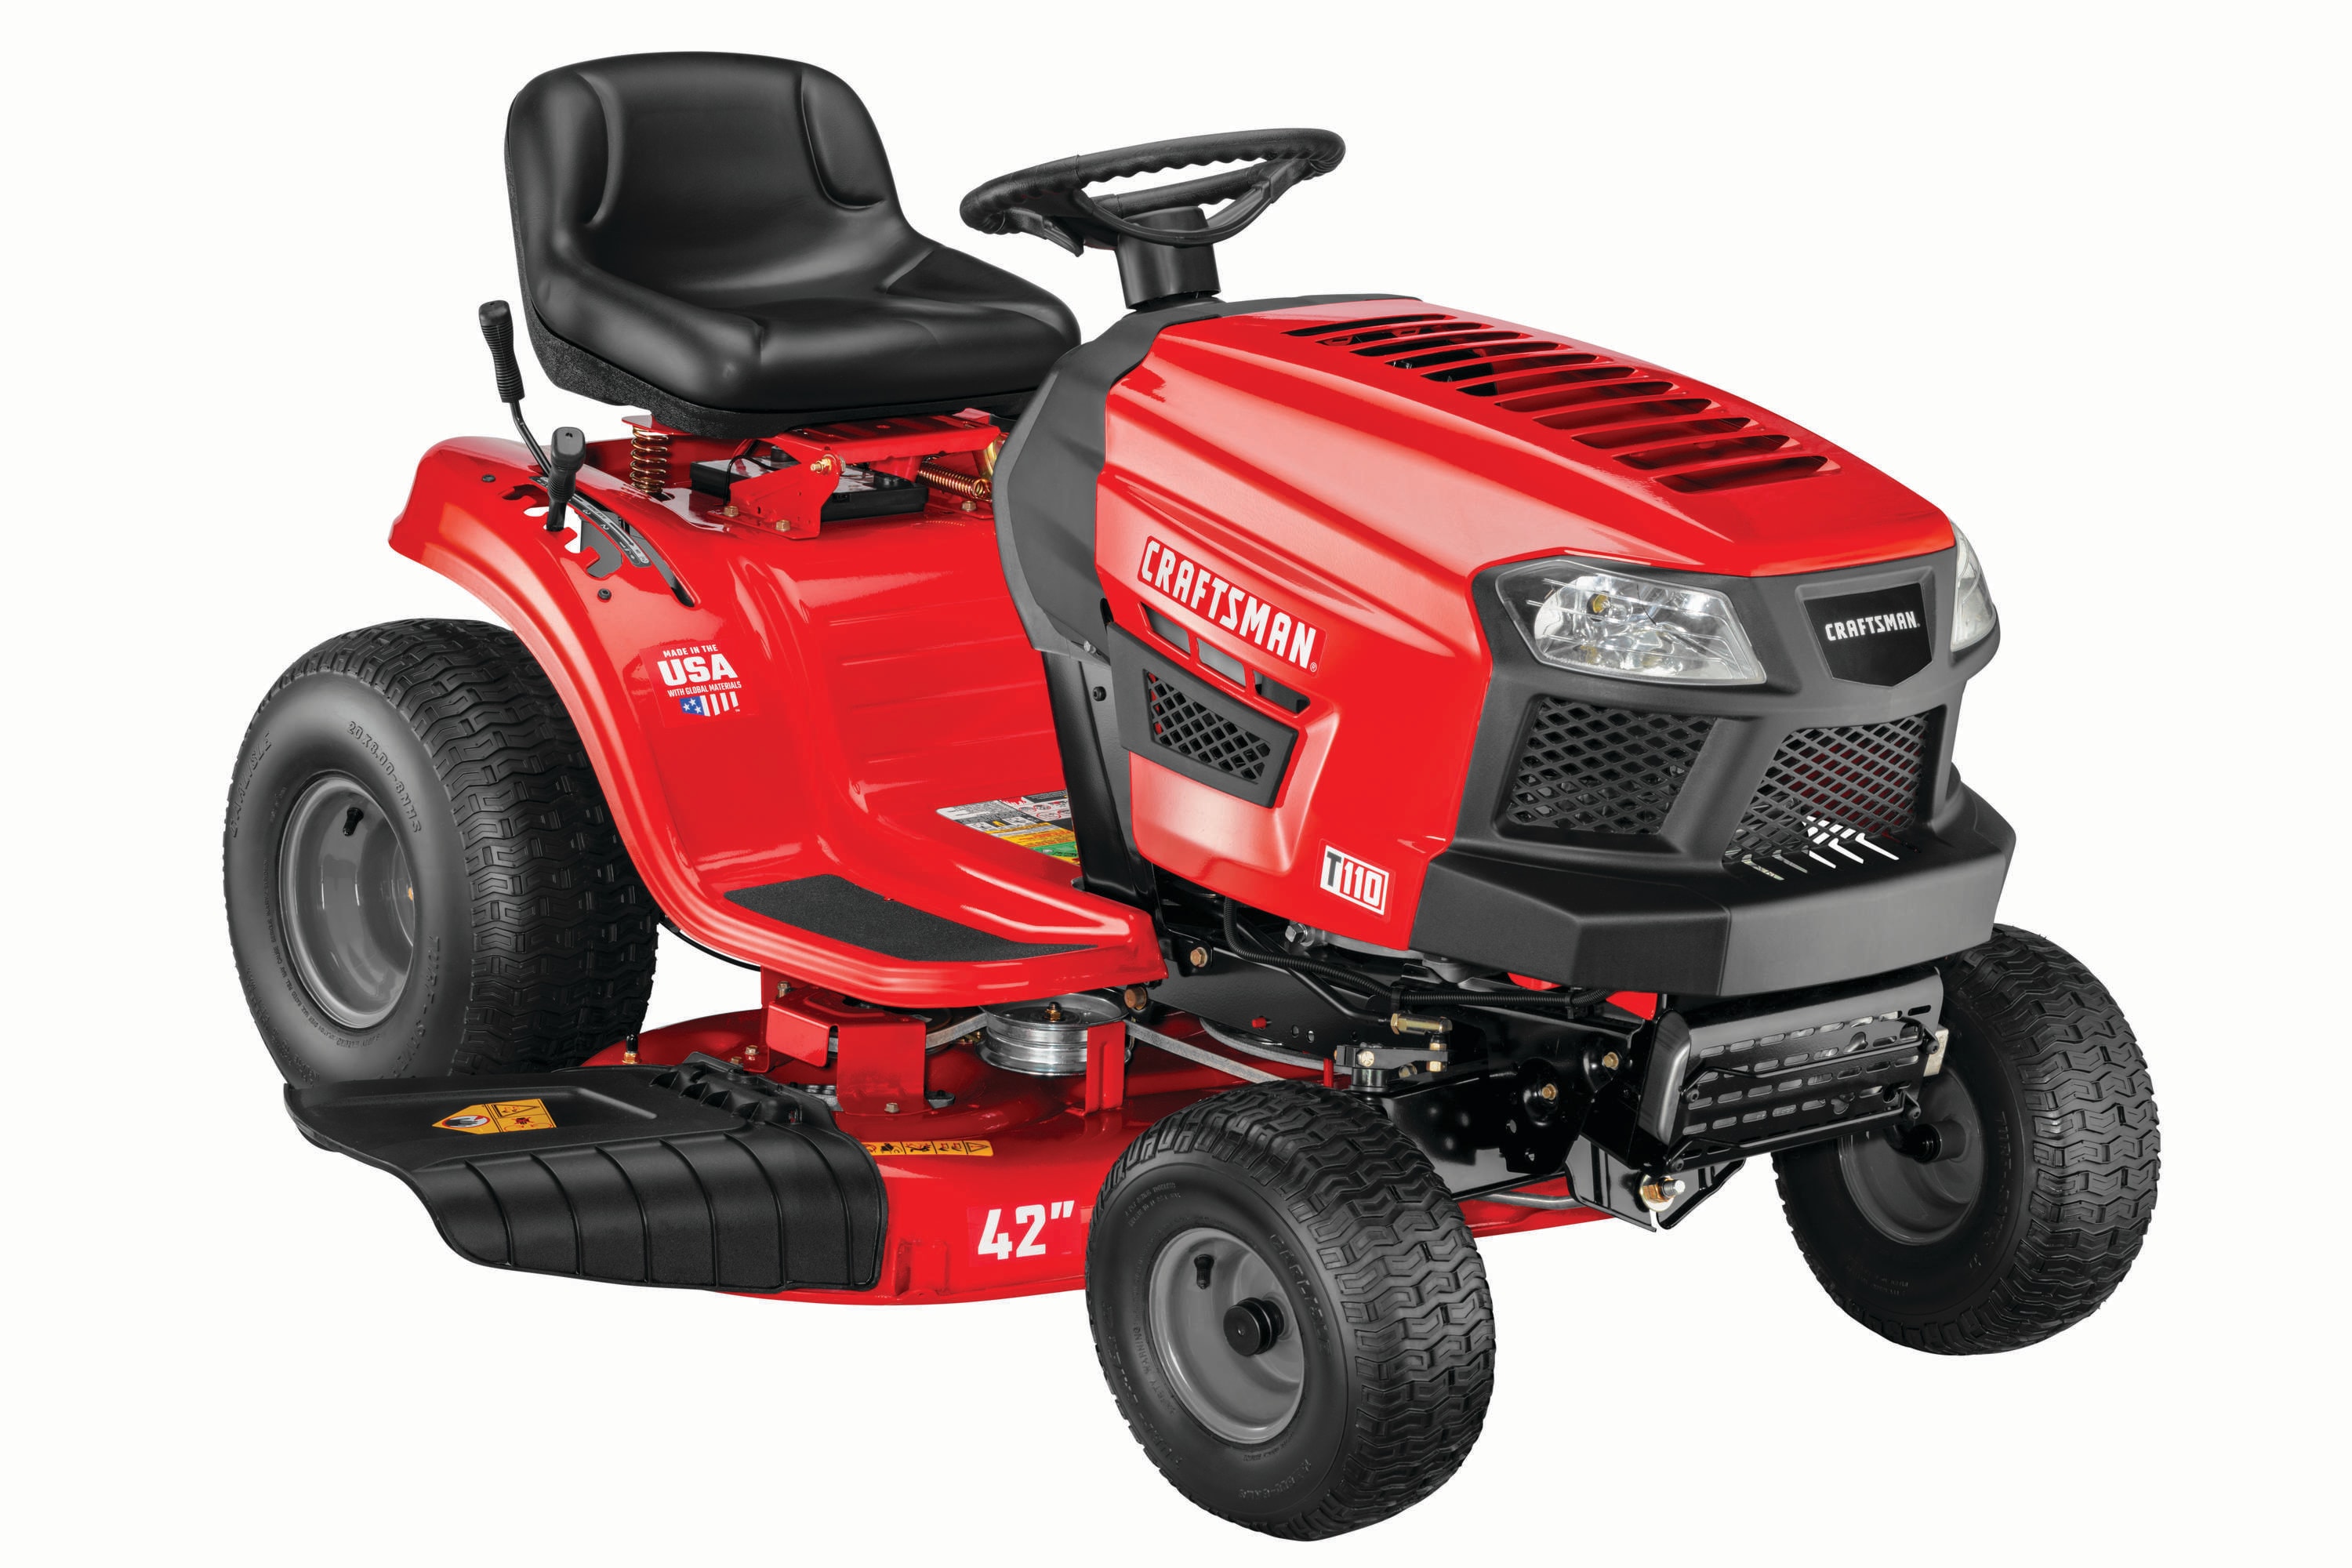 CRAFTSMAN T110 17.5-HP Manual/Gear 42-in Riding Lawn Mower Mulching Capable  (Kit Sold Separately) at